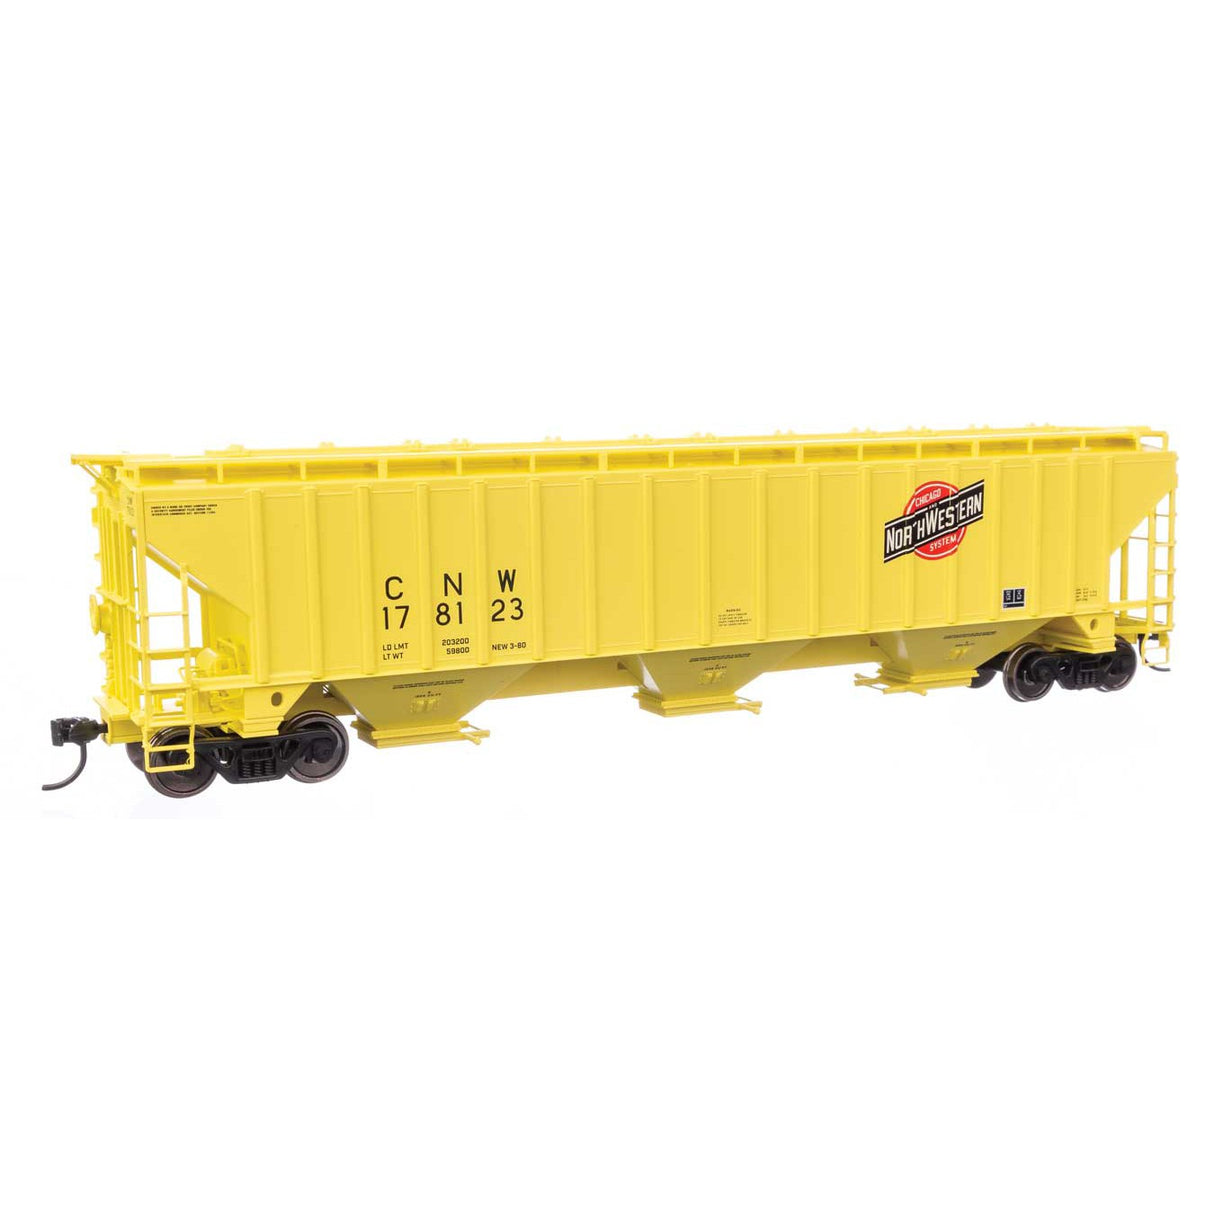 Walthers Mainline HO Scale Chicago & North Western 178123 Trinity 4750 Covered Hopper